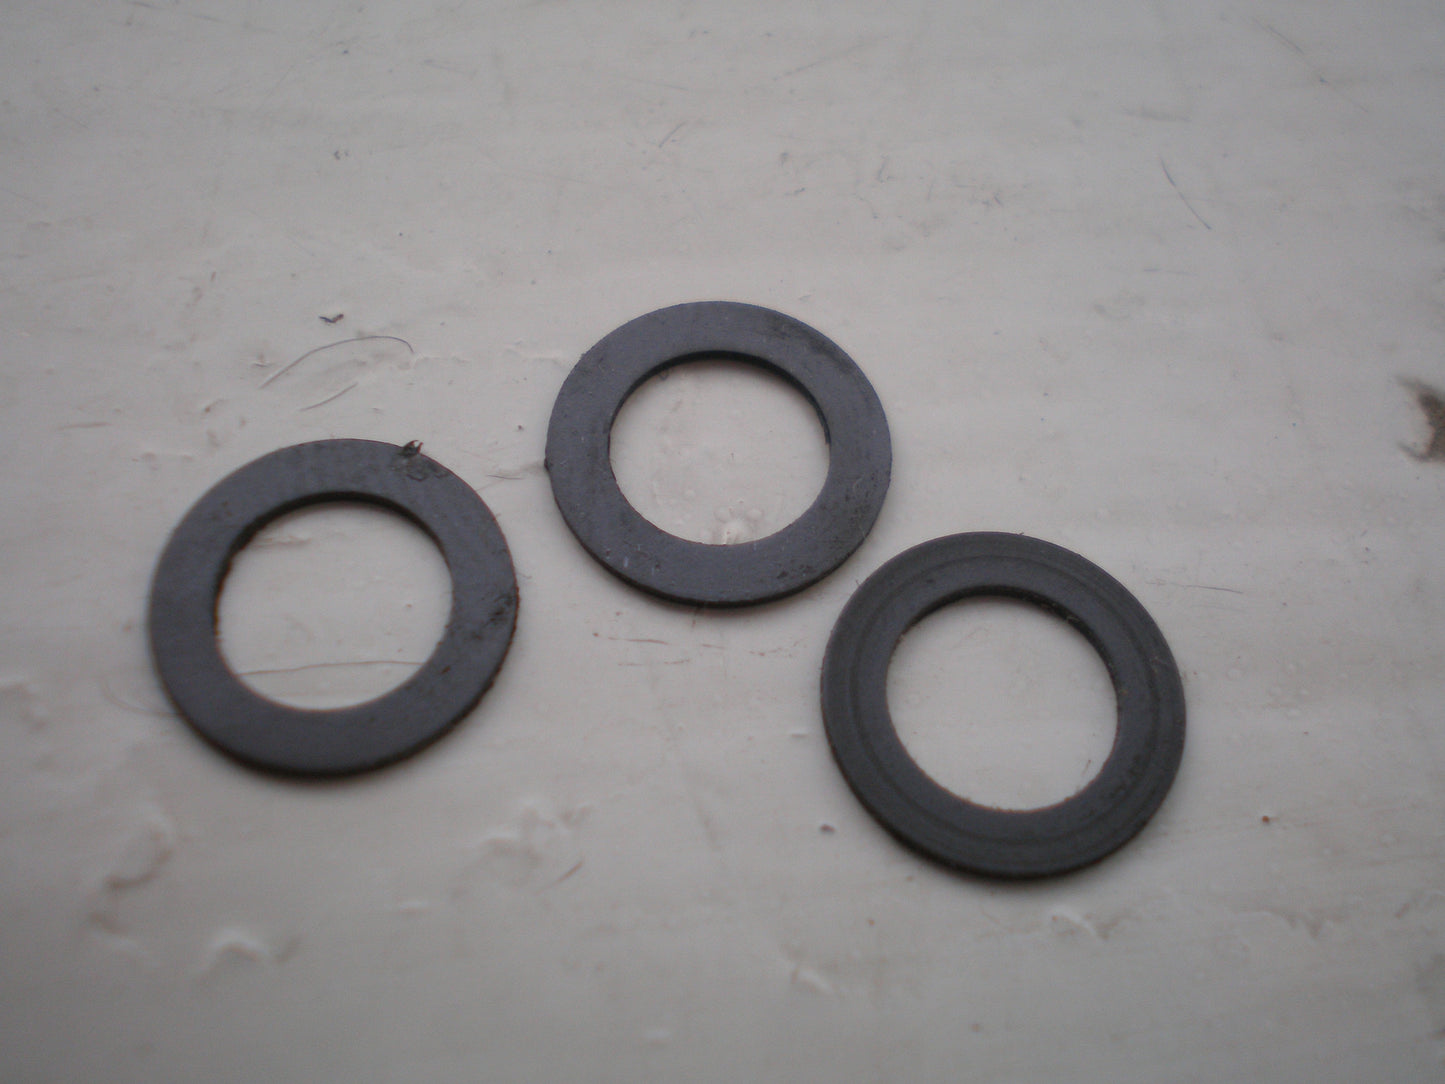 Black Teflon washers in 4mm 5mm and 6mm 8mm